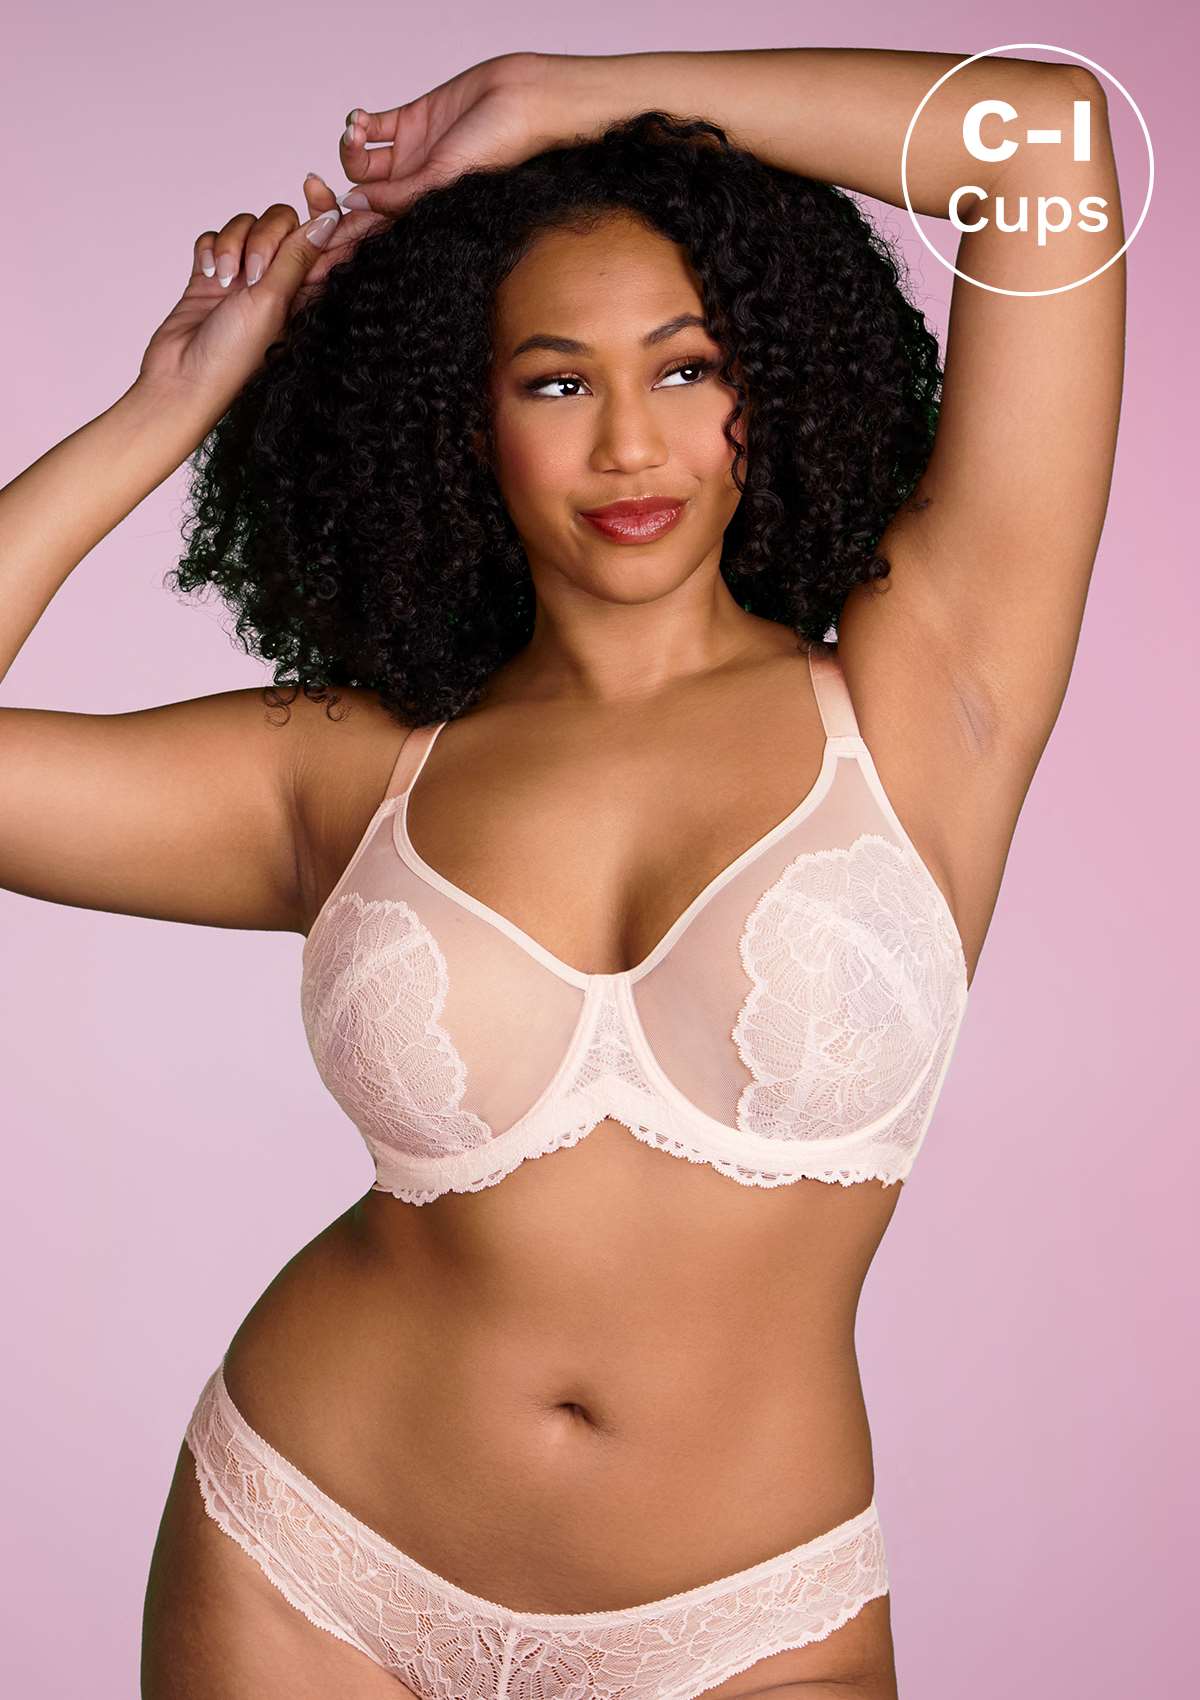 HSIA Blossom Sheer Lace Bra: Comfortable Underwire Bra For Big Busts - Dusty Peach / 38 / G